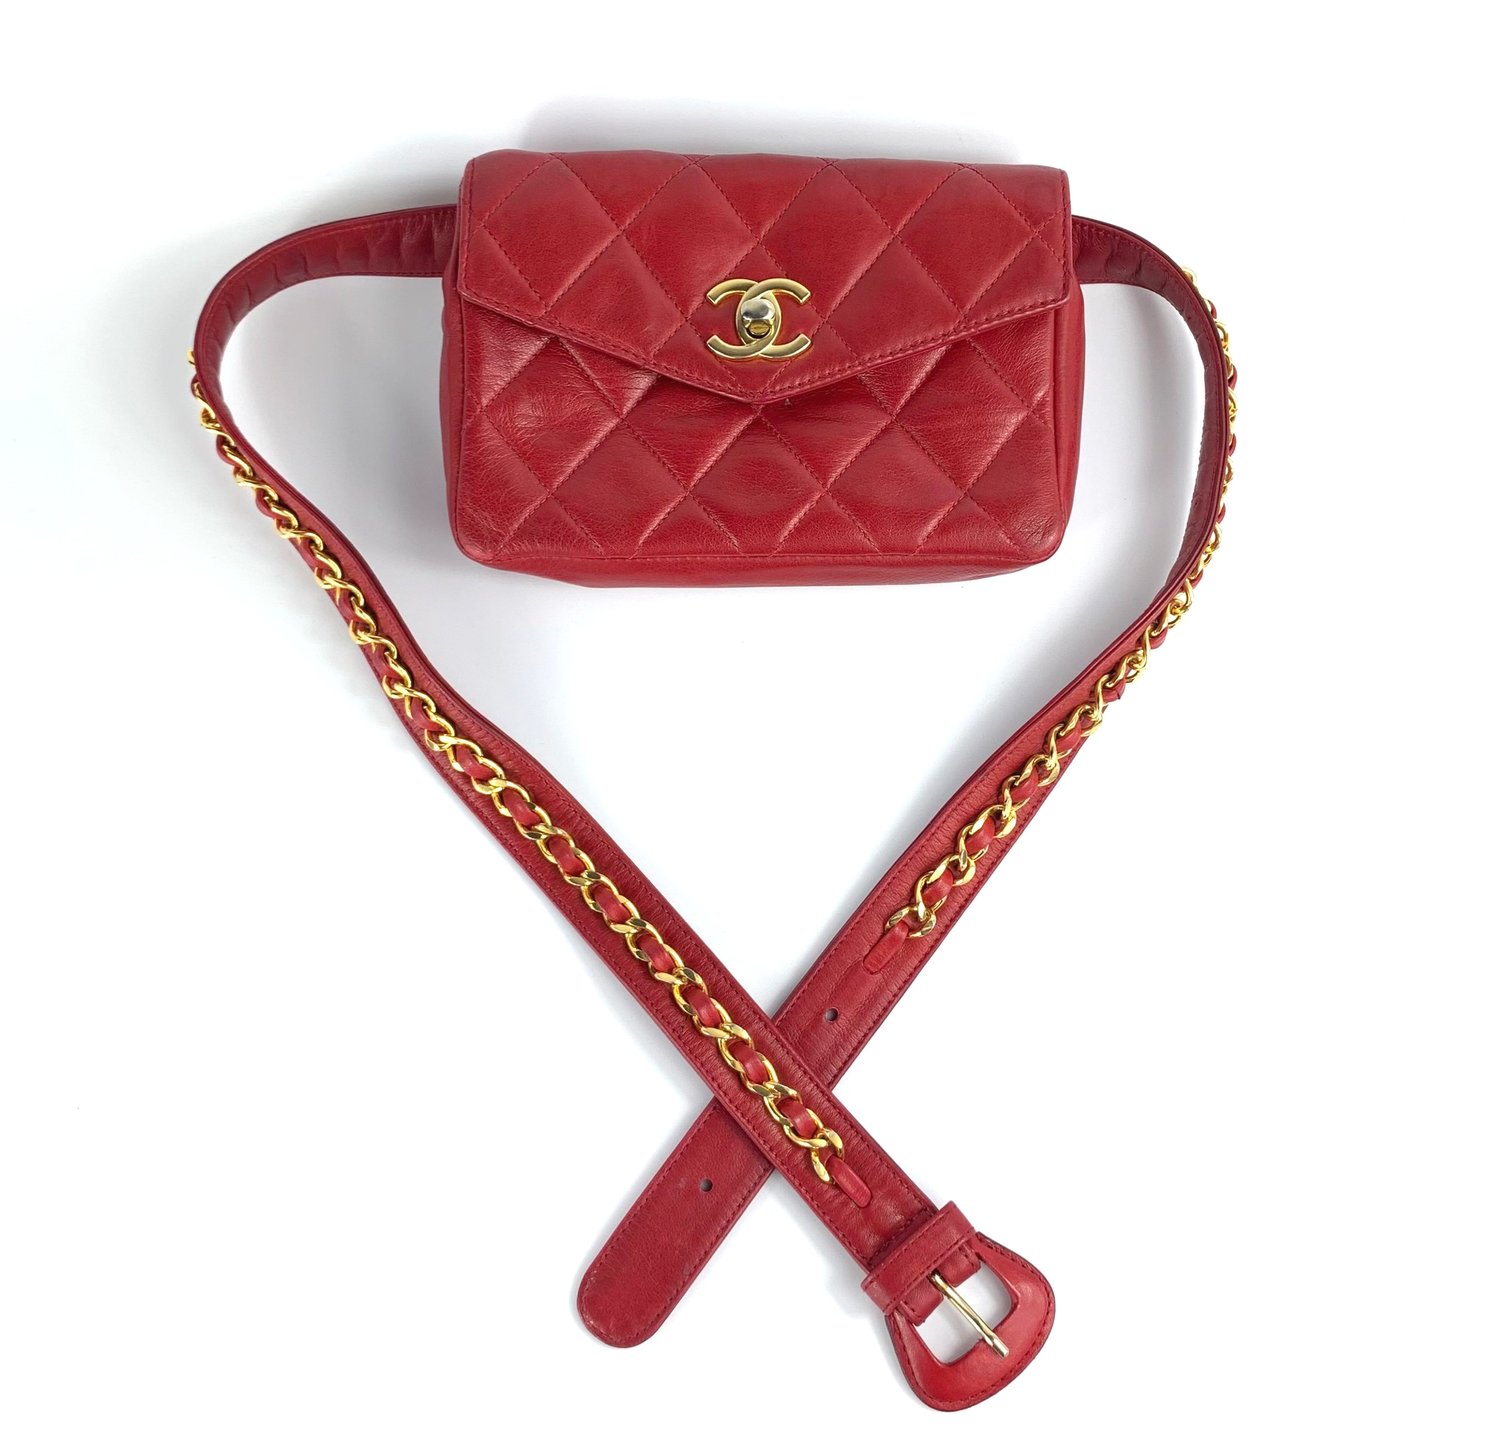 Affordable Chanel Bag<Br/>Preloved Chanel Bag<Br/>Chanel Waist Bag<Br/>Red Chanel  Bag<Br/>Preowned Chanel Bag – Liza’S Reluxe Boutique” style=”width:100%” title=”Affordable Chanel bag<br />preloved Chanel bag<br />Chanel waist bag<br />Red Chanel  Bag<br />preowned chanel bag – Liza’s Reluxe Boutique”><figcaption>Affordable Chanel Bag<Br/>Preloved Chanel Bag<Br/>Chanel Waist Bag<Br/>Red Chanel  Bag<Br/>Preowned Chanel Bag – Liza’S Reluxe Boutique</figcaption></figure>
<figure><img decoding=